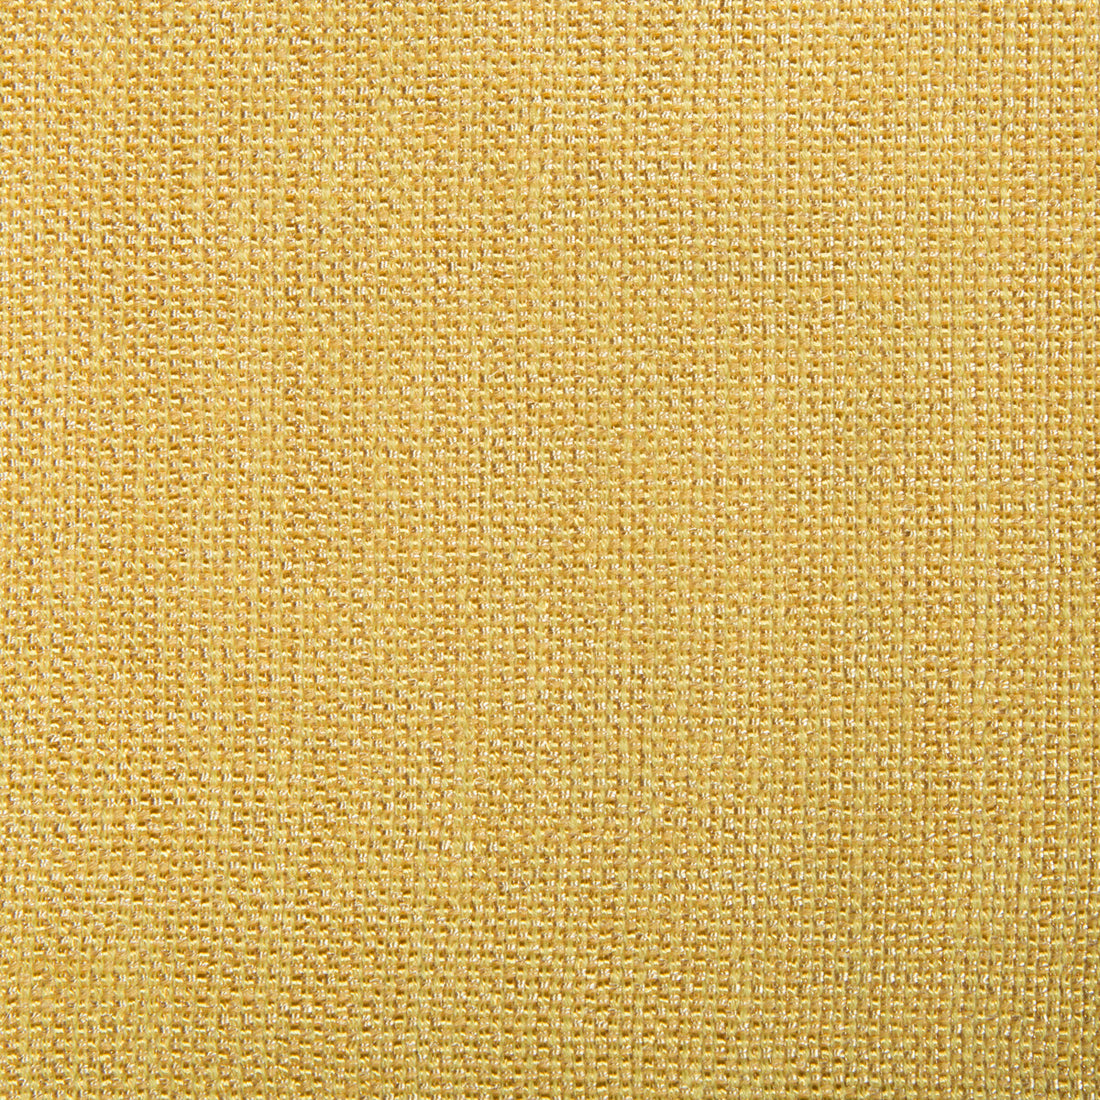 Kravet Contract fabric in 4458-14 color - pattern 4458.14.0 - by Kravet Contract